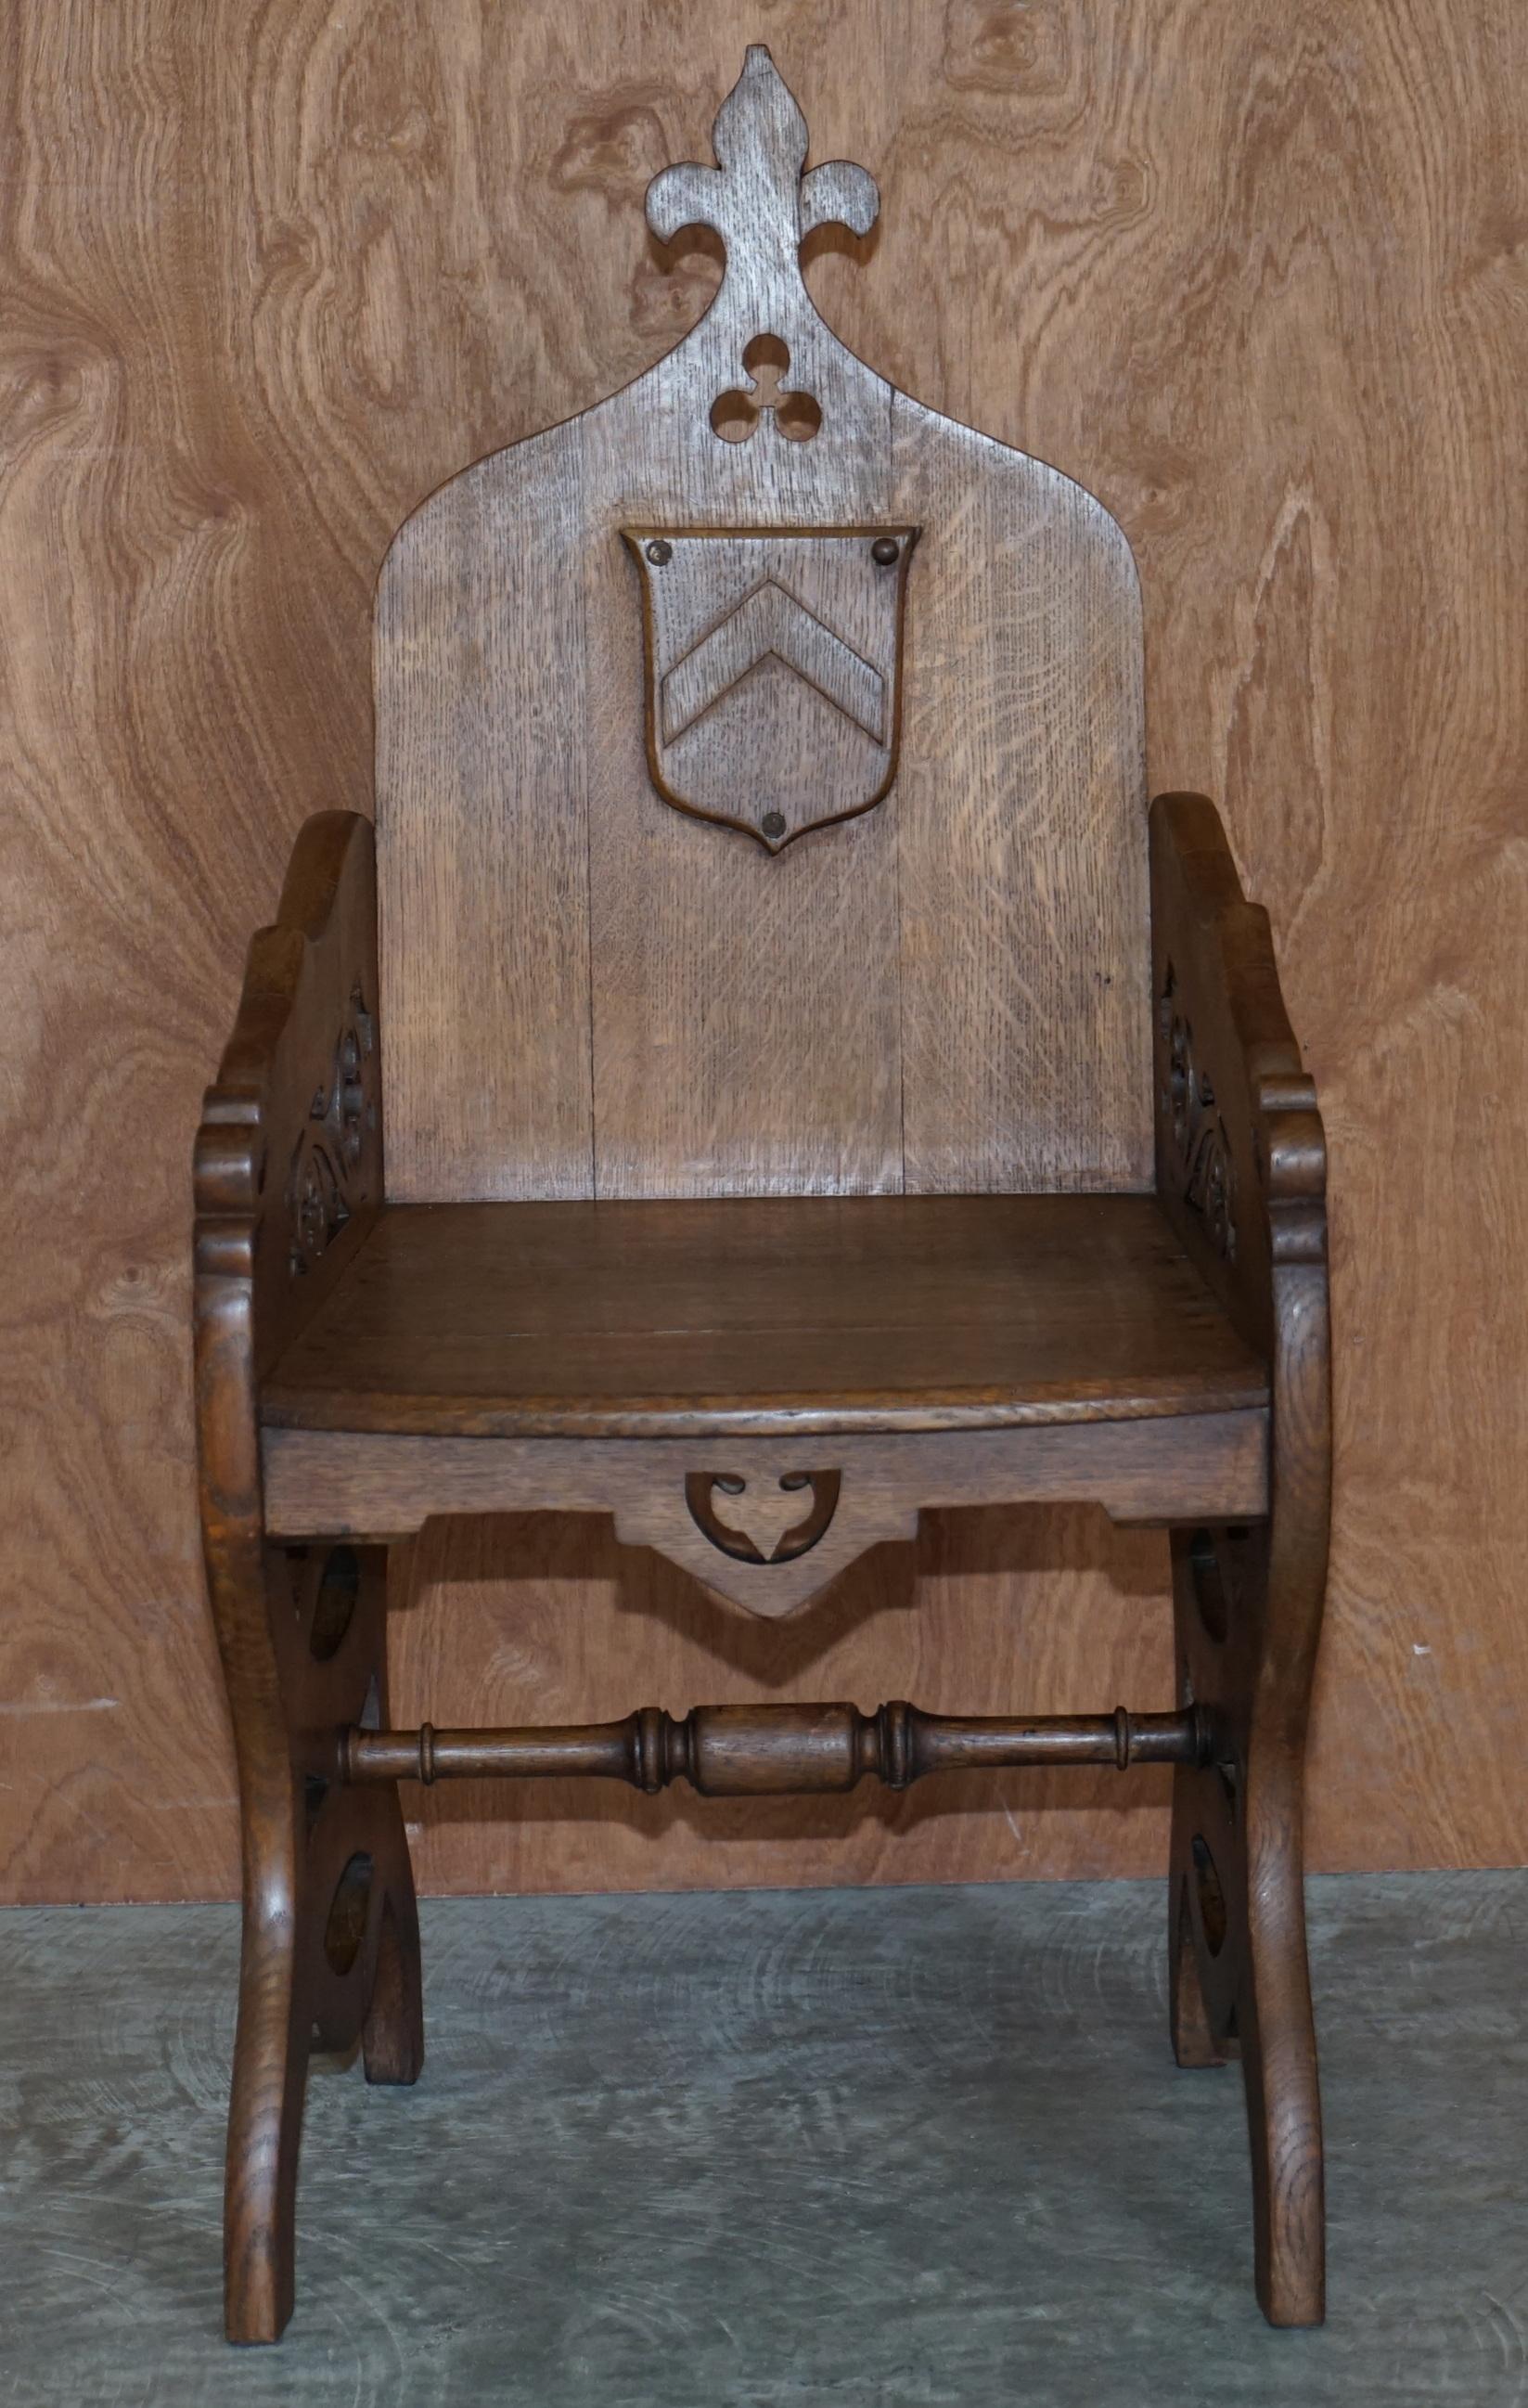 We are delighted to offer this lovely antique Gothic revival circa 1900 English oak steeple back armchair

A good looking and well made oak table, it has the period timber patina, the back has a small coat of arms plaque, it also has an original